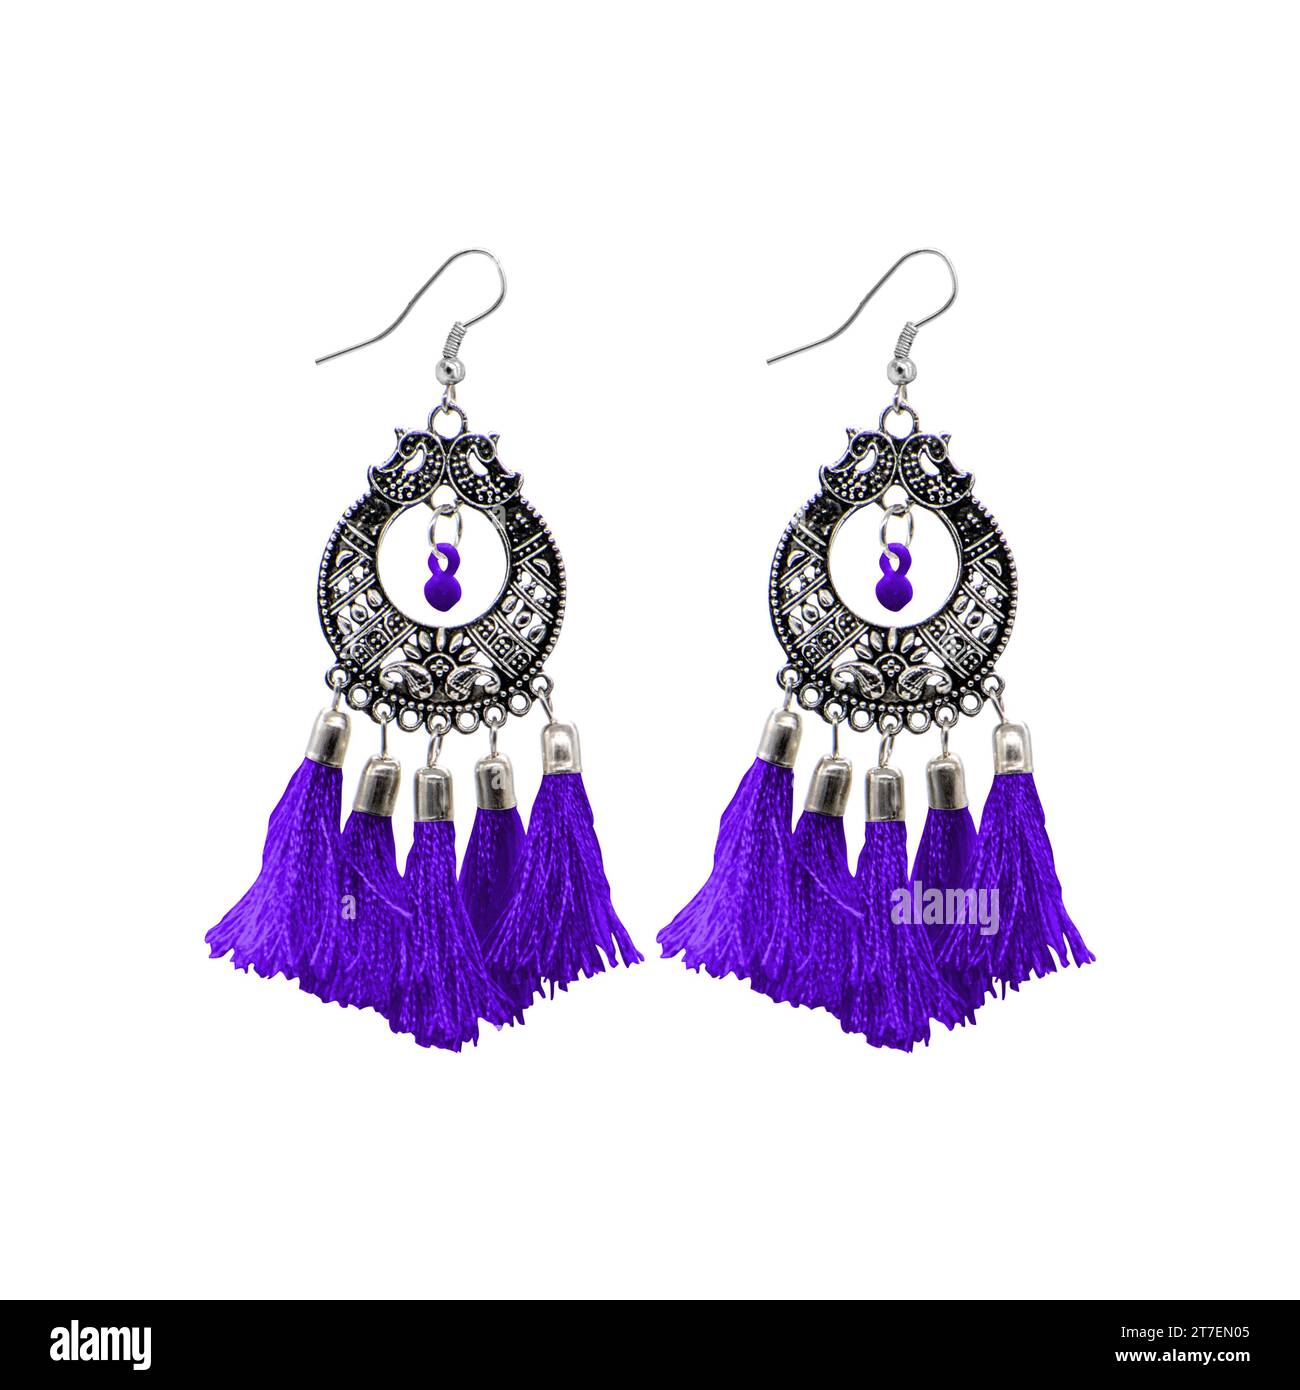 Two sets of purple earrings with silver and black beaded details Stock Photo